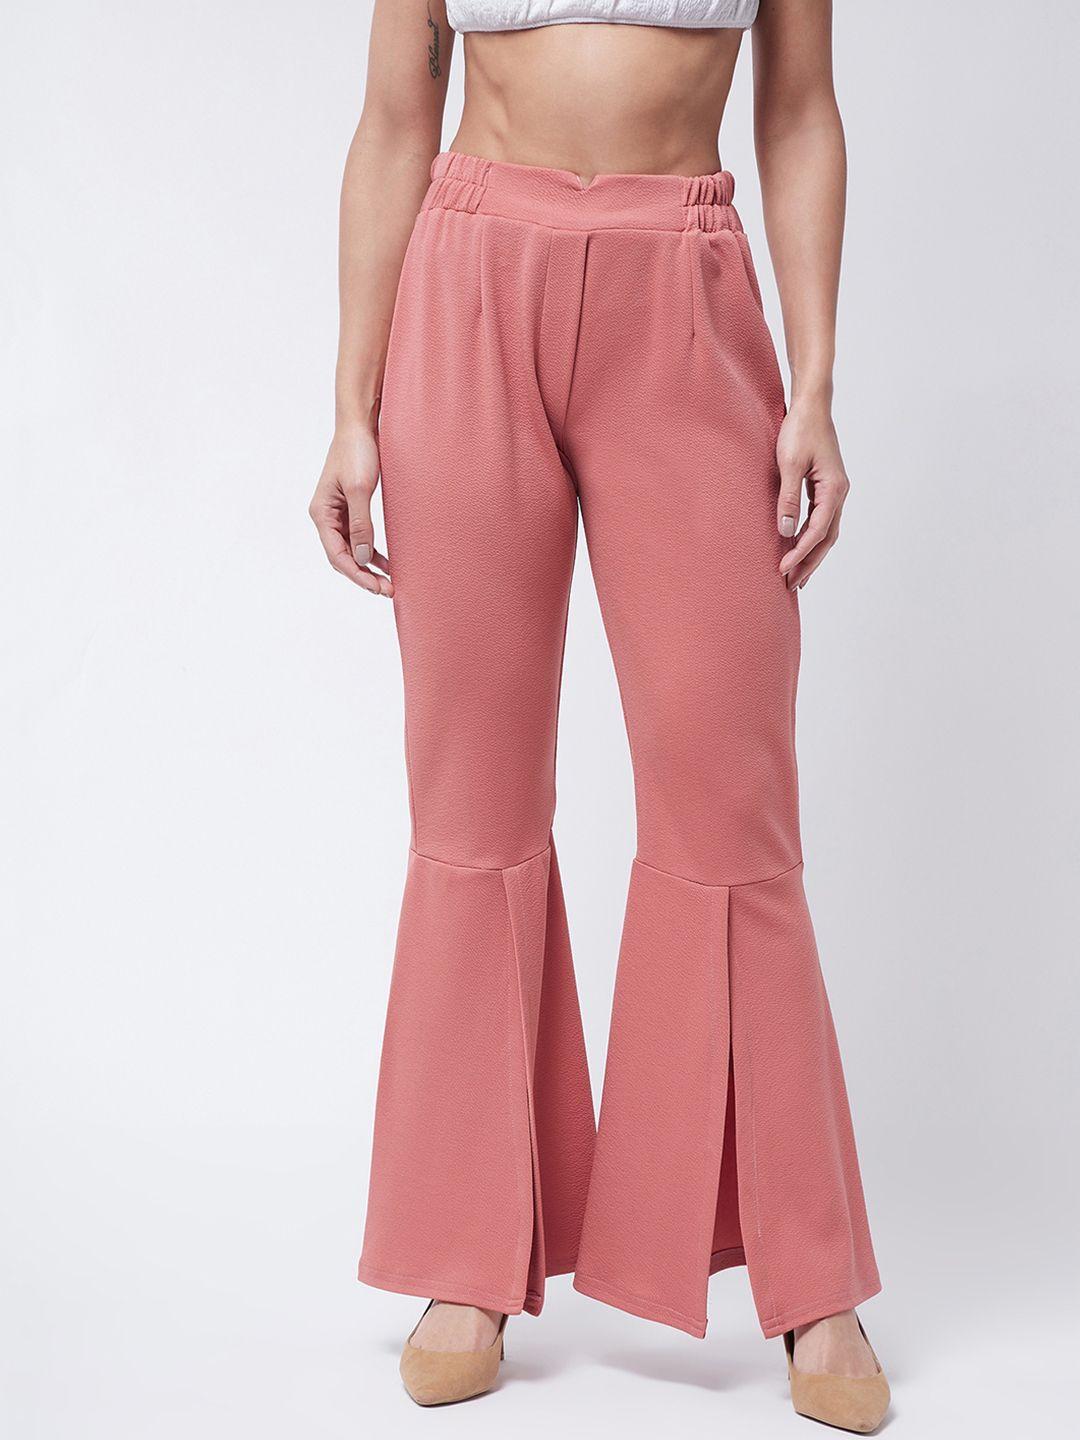 purple feather women peach-coloured smart flared high-rise trousers